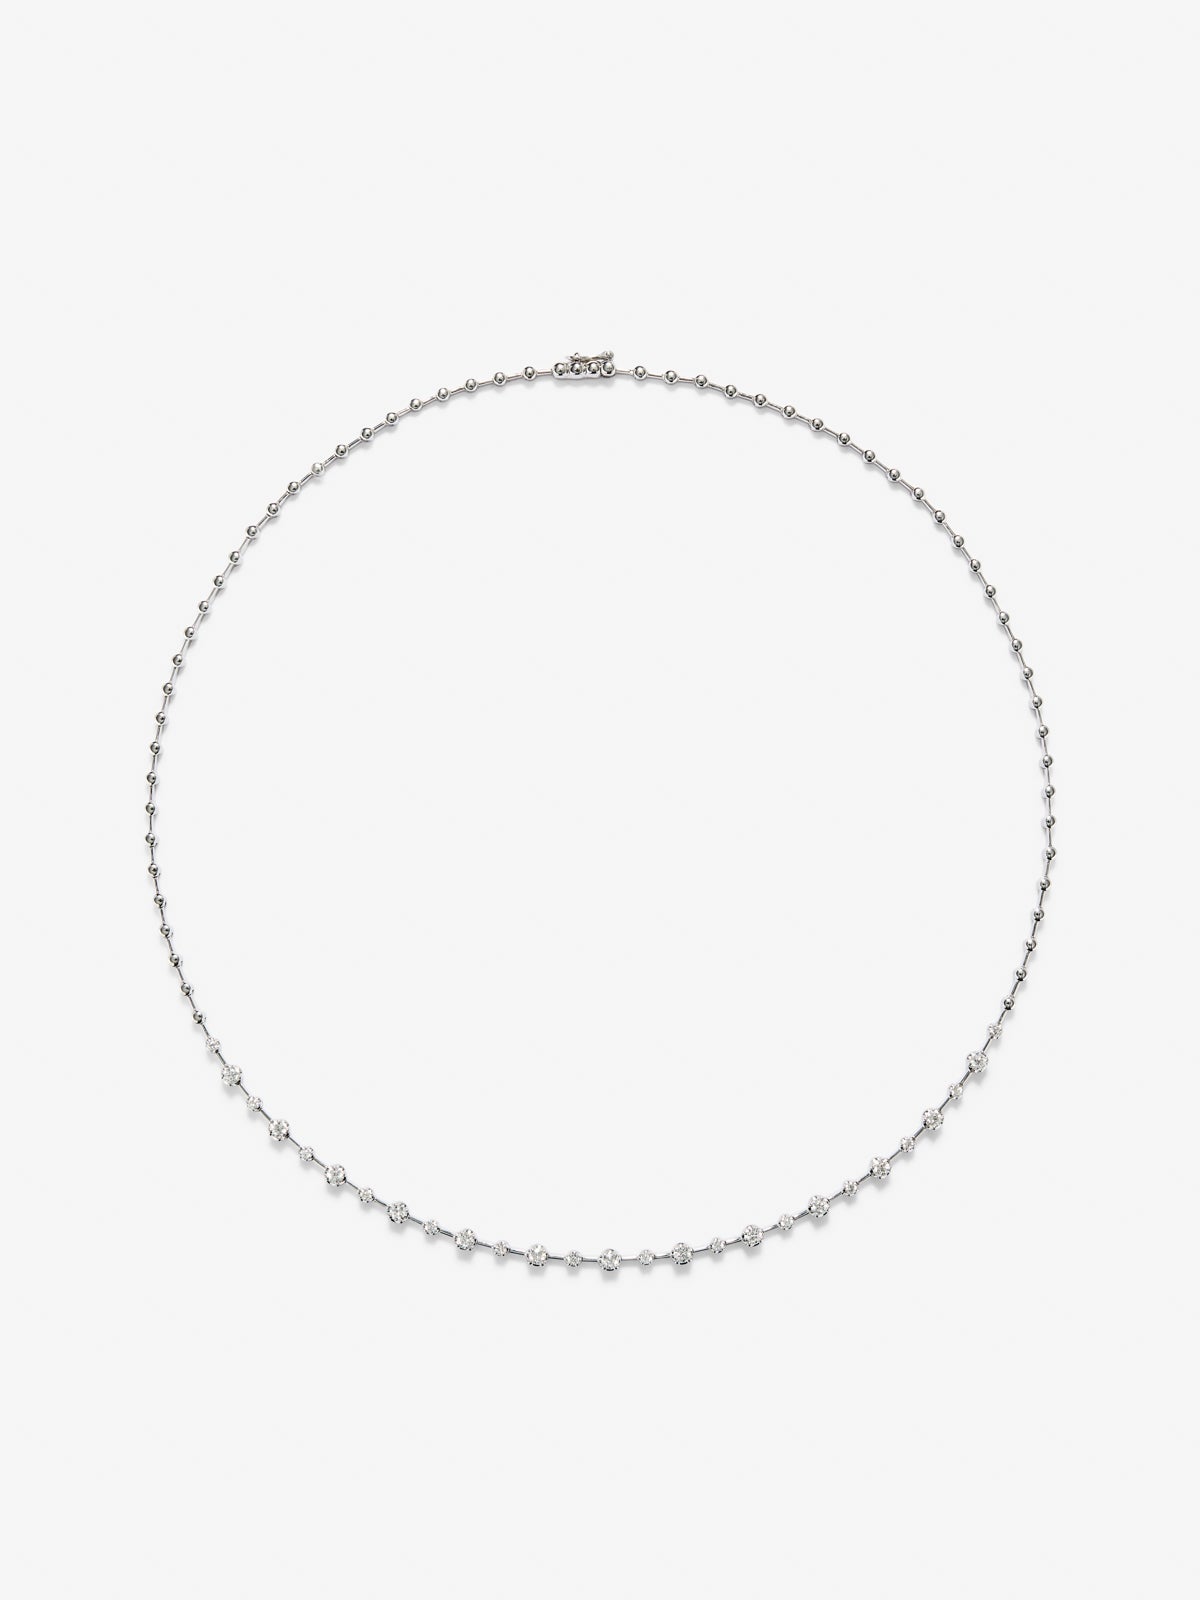 18K white gold necklace with 27 brilliant-cut white diamonds with a total of 0.95 cts